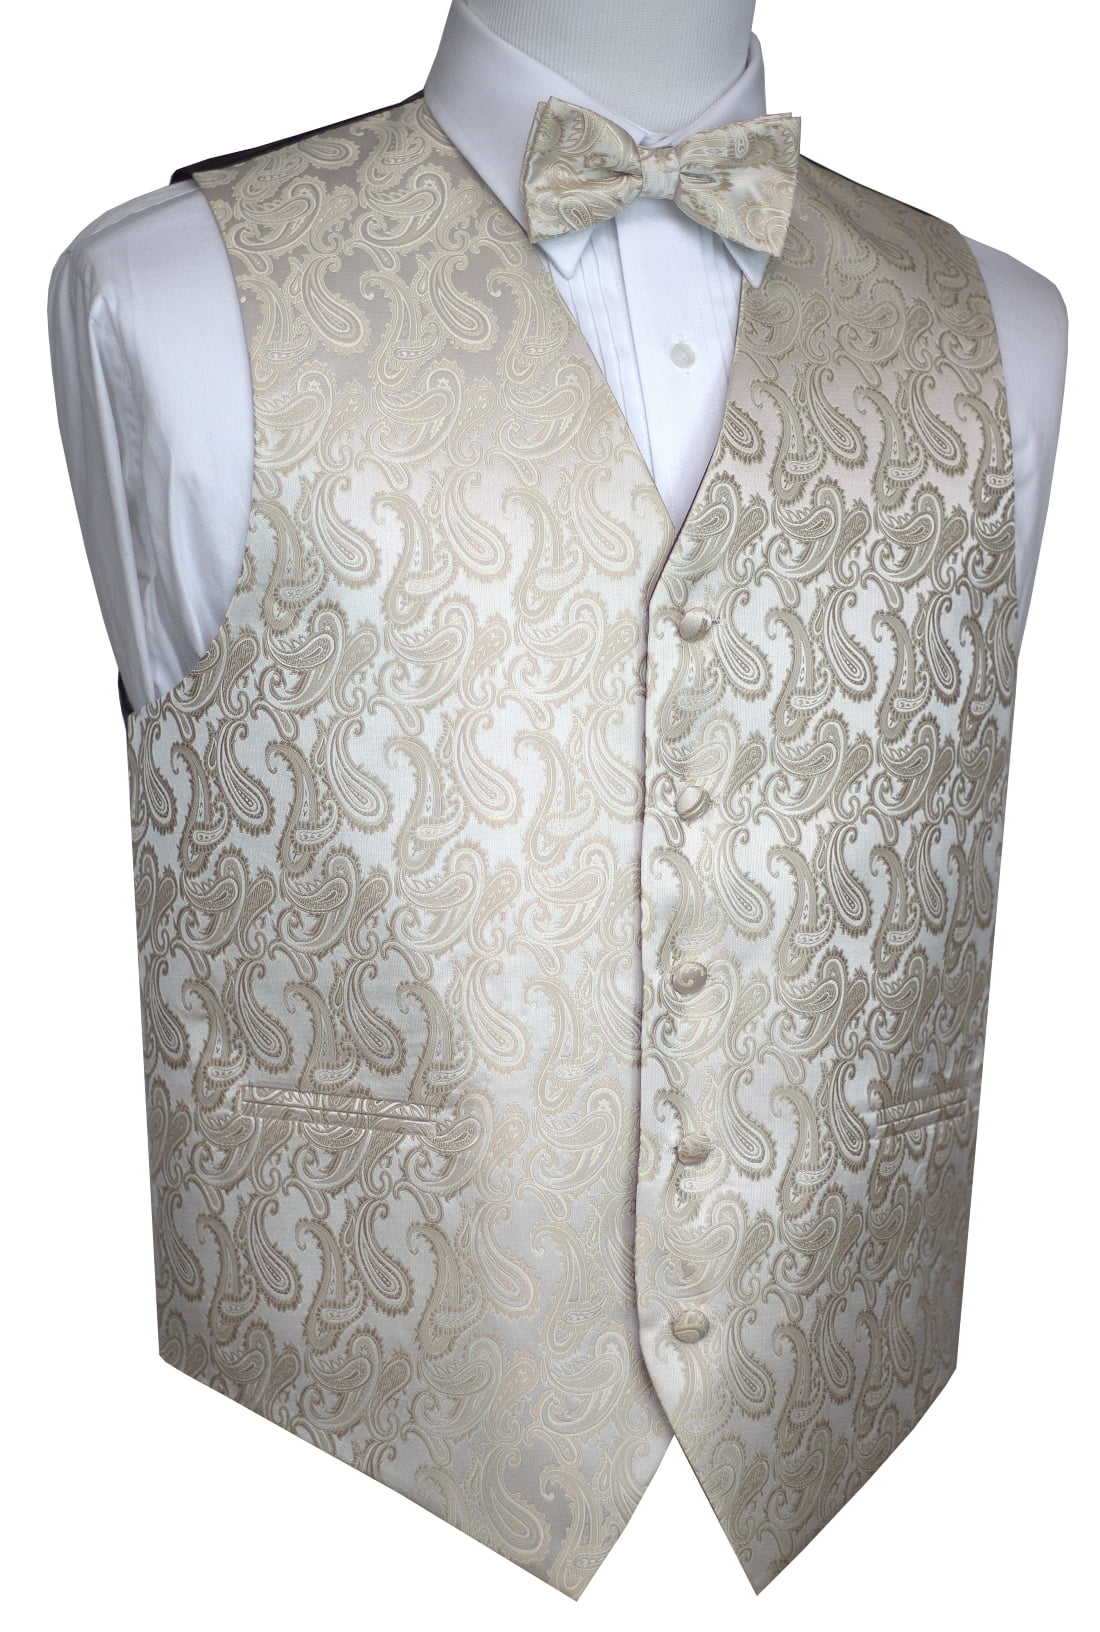 New Men's Formal Vest Tuxedo Waistcoat Coral with Bowtie wedding prom party 